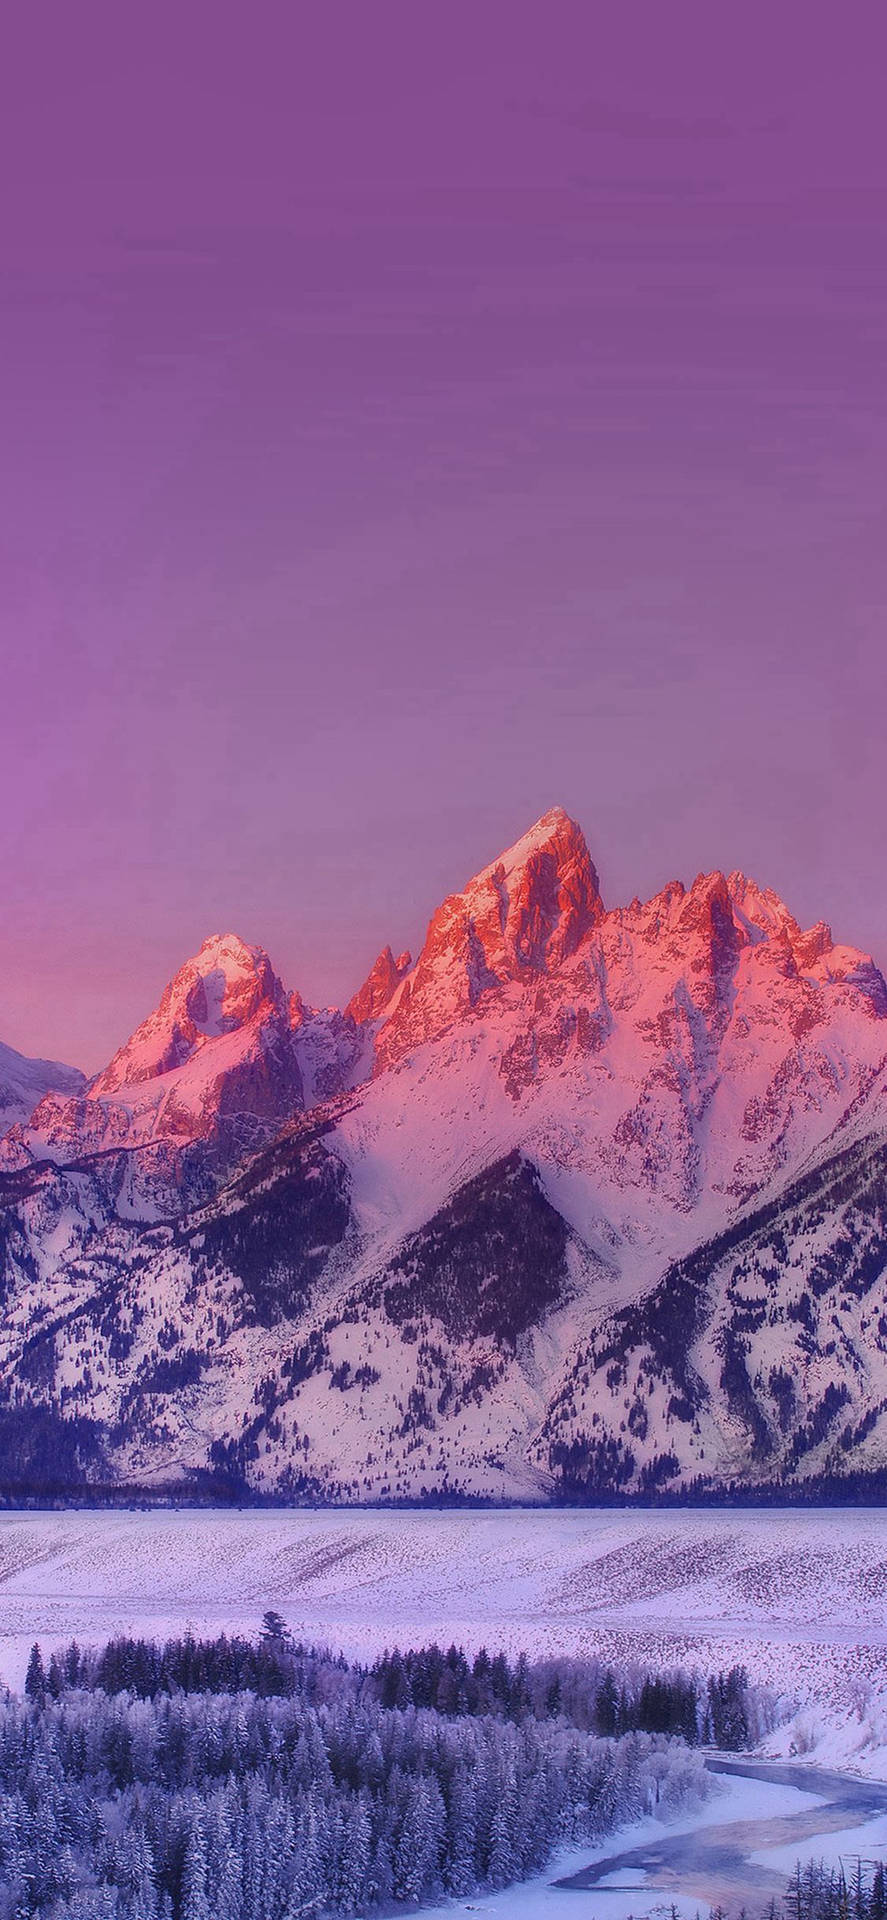 Aesthetic Snowy Mountain For Iphone Background